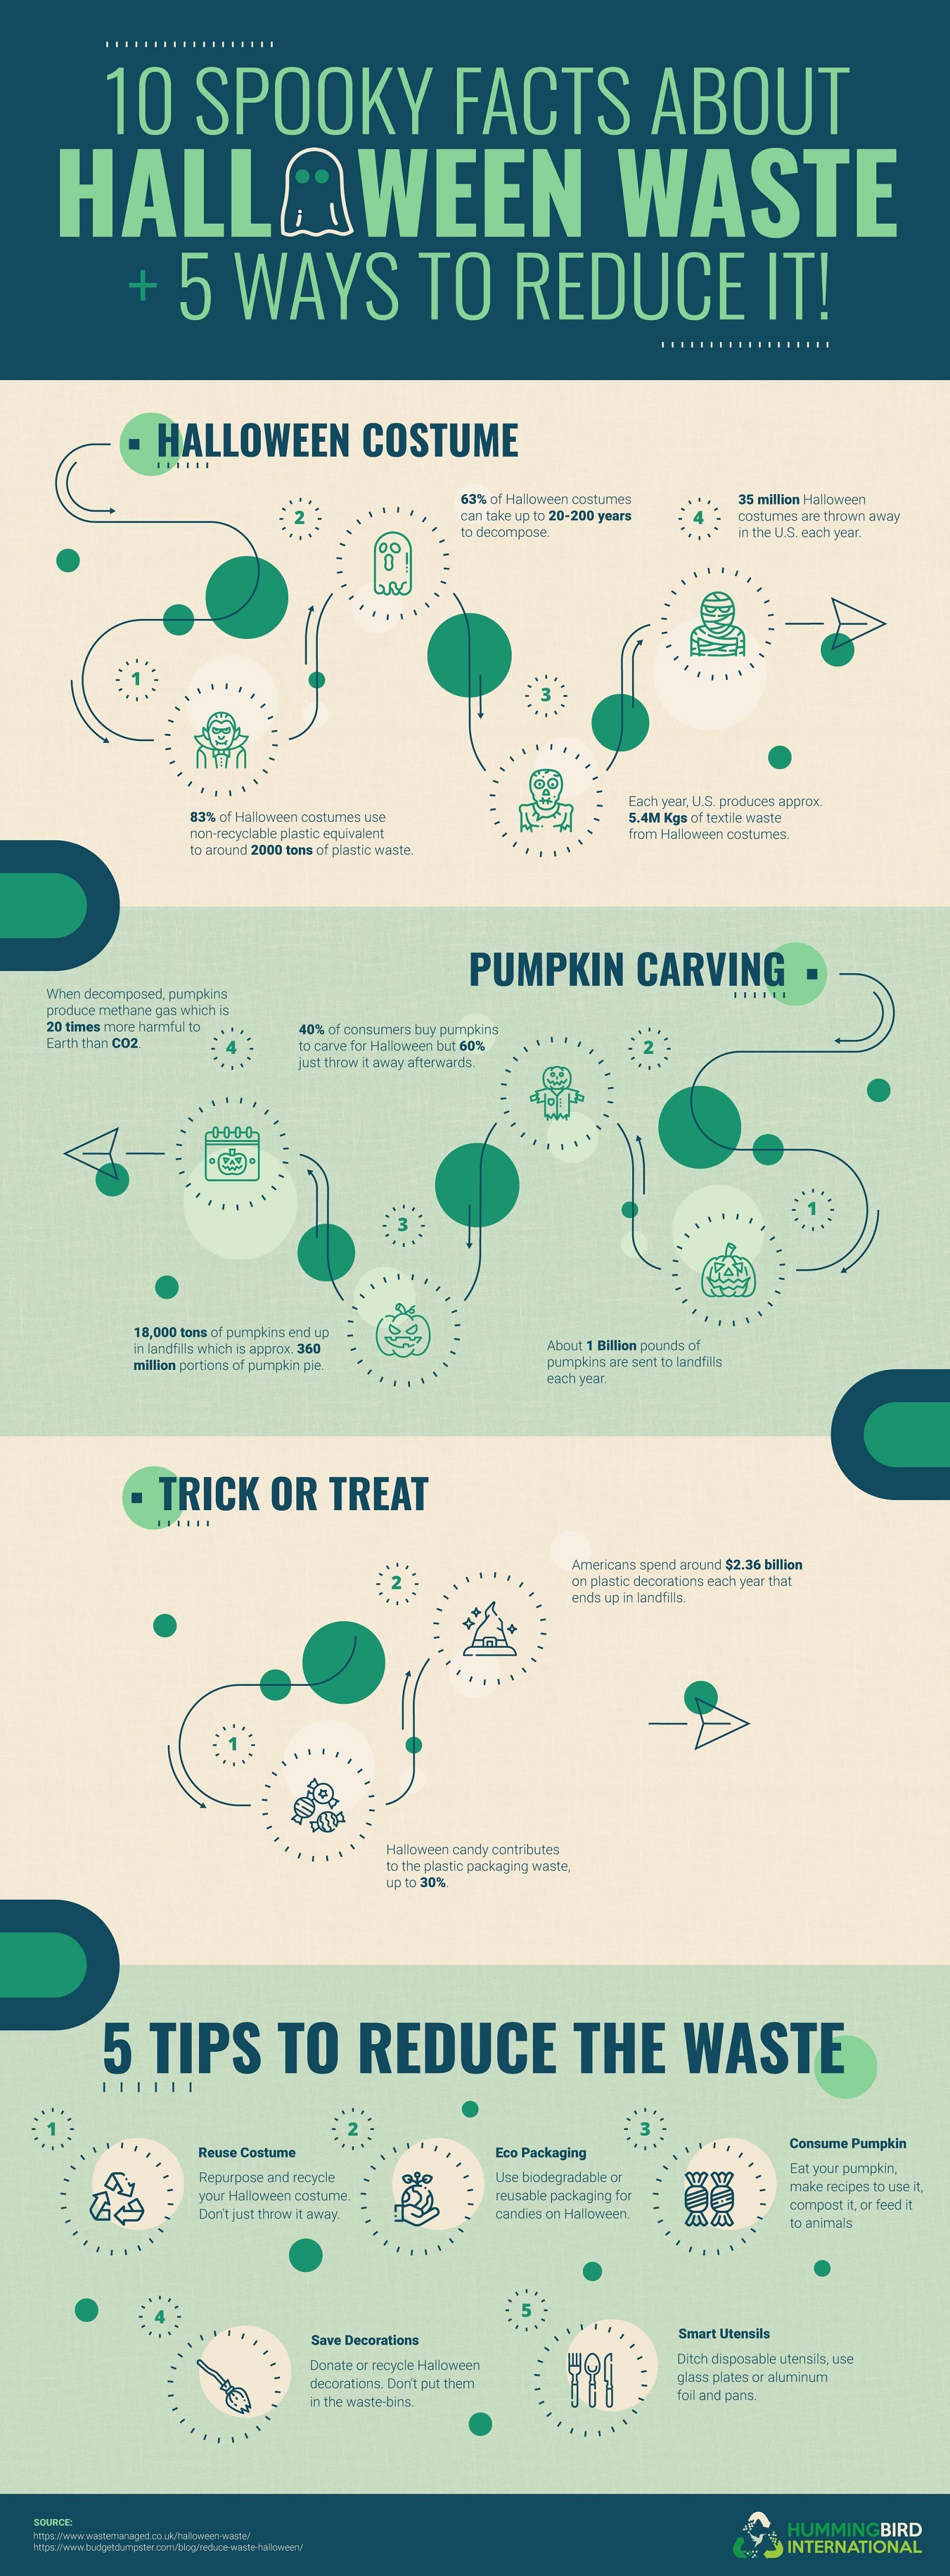 10 Spooky Facts About Halloween Waste And 5 Ways To Reduce It